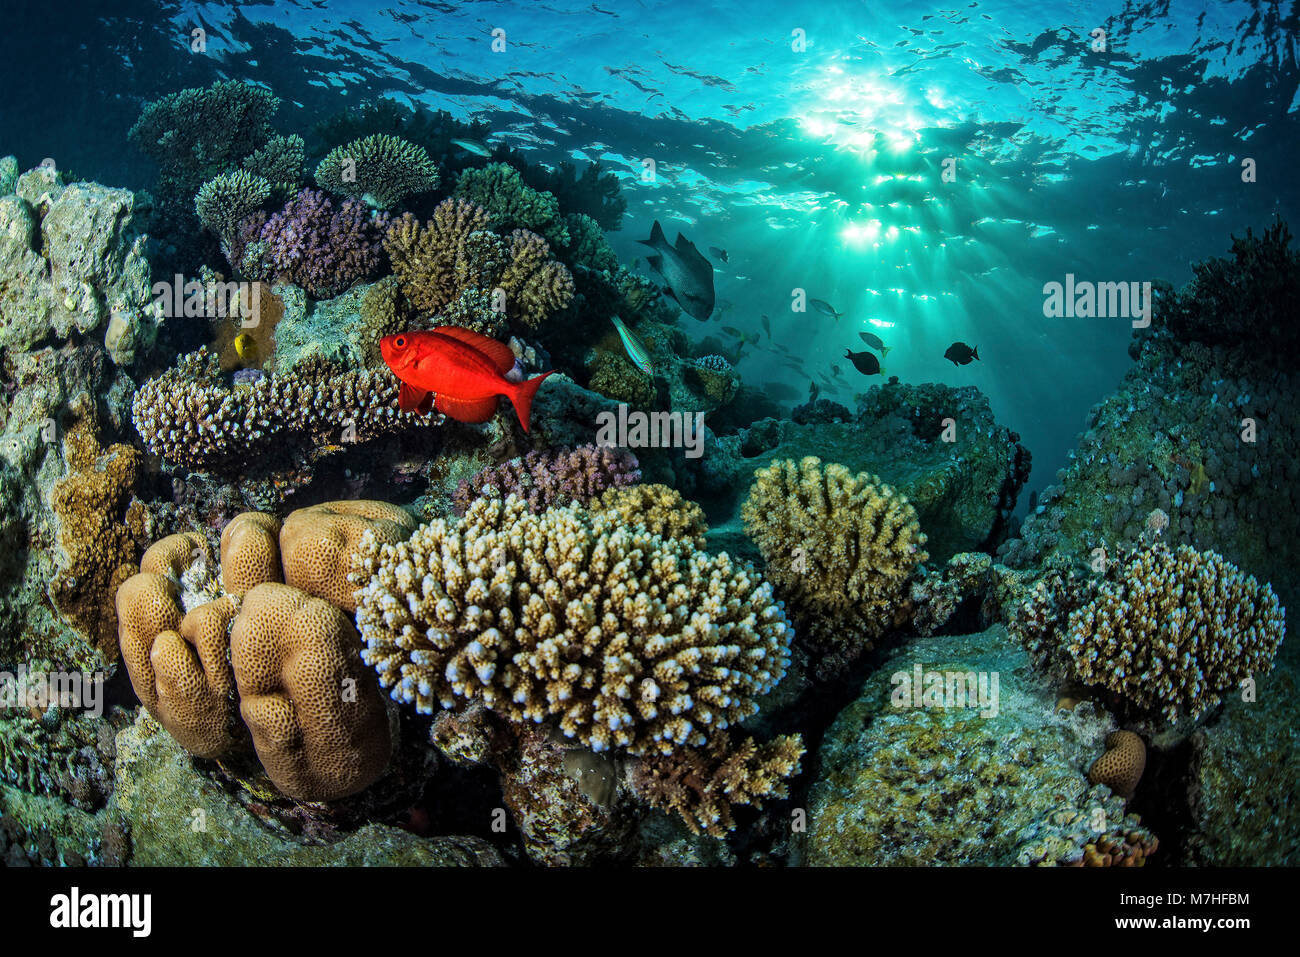 A coral reef under dappled light in the Red Sea, Egypt. Stock Photo